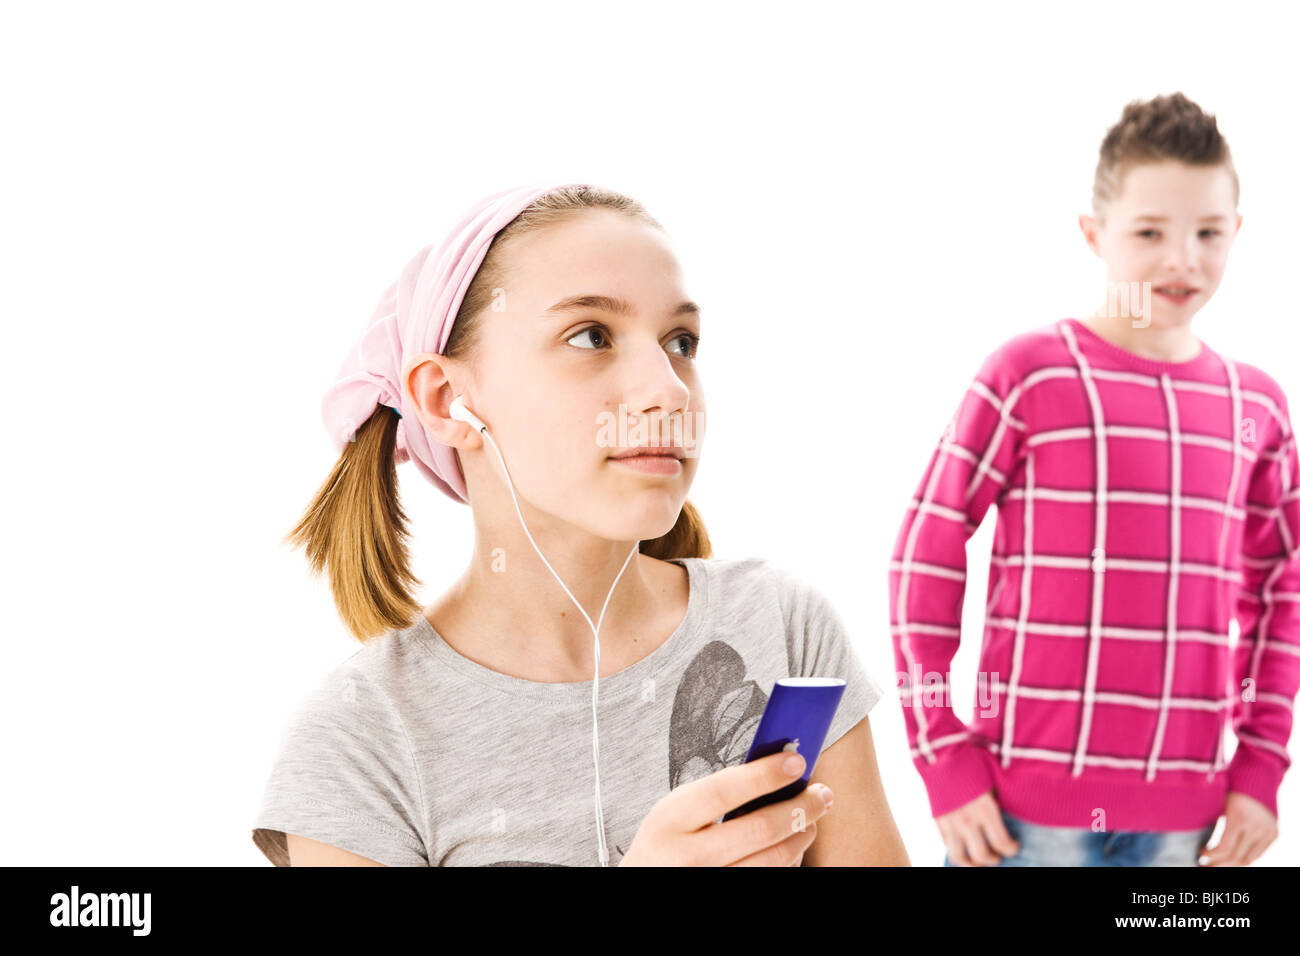 Boy standing behind a girl who is listening to music with headphones Stock Photo